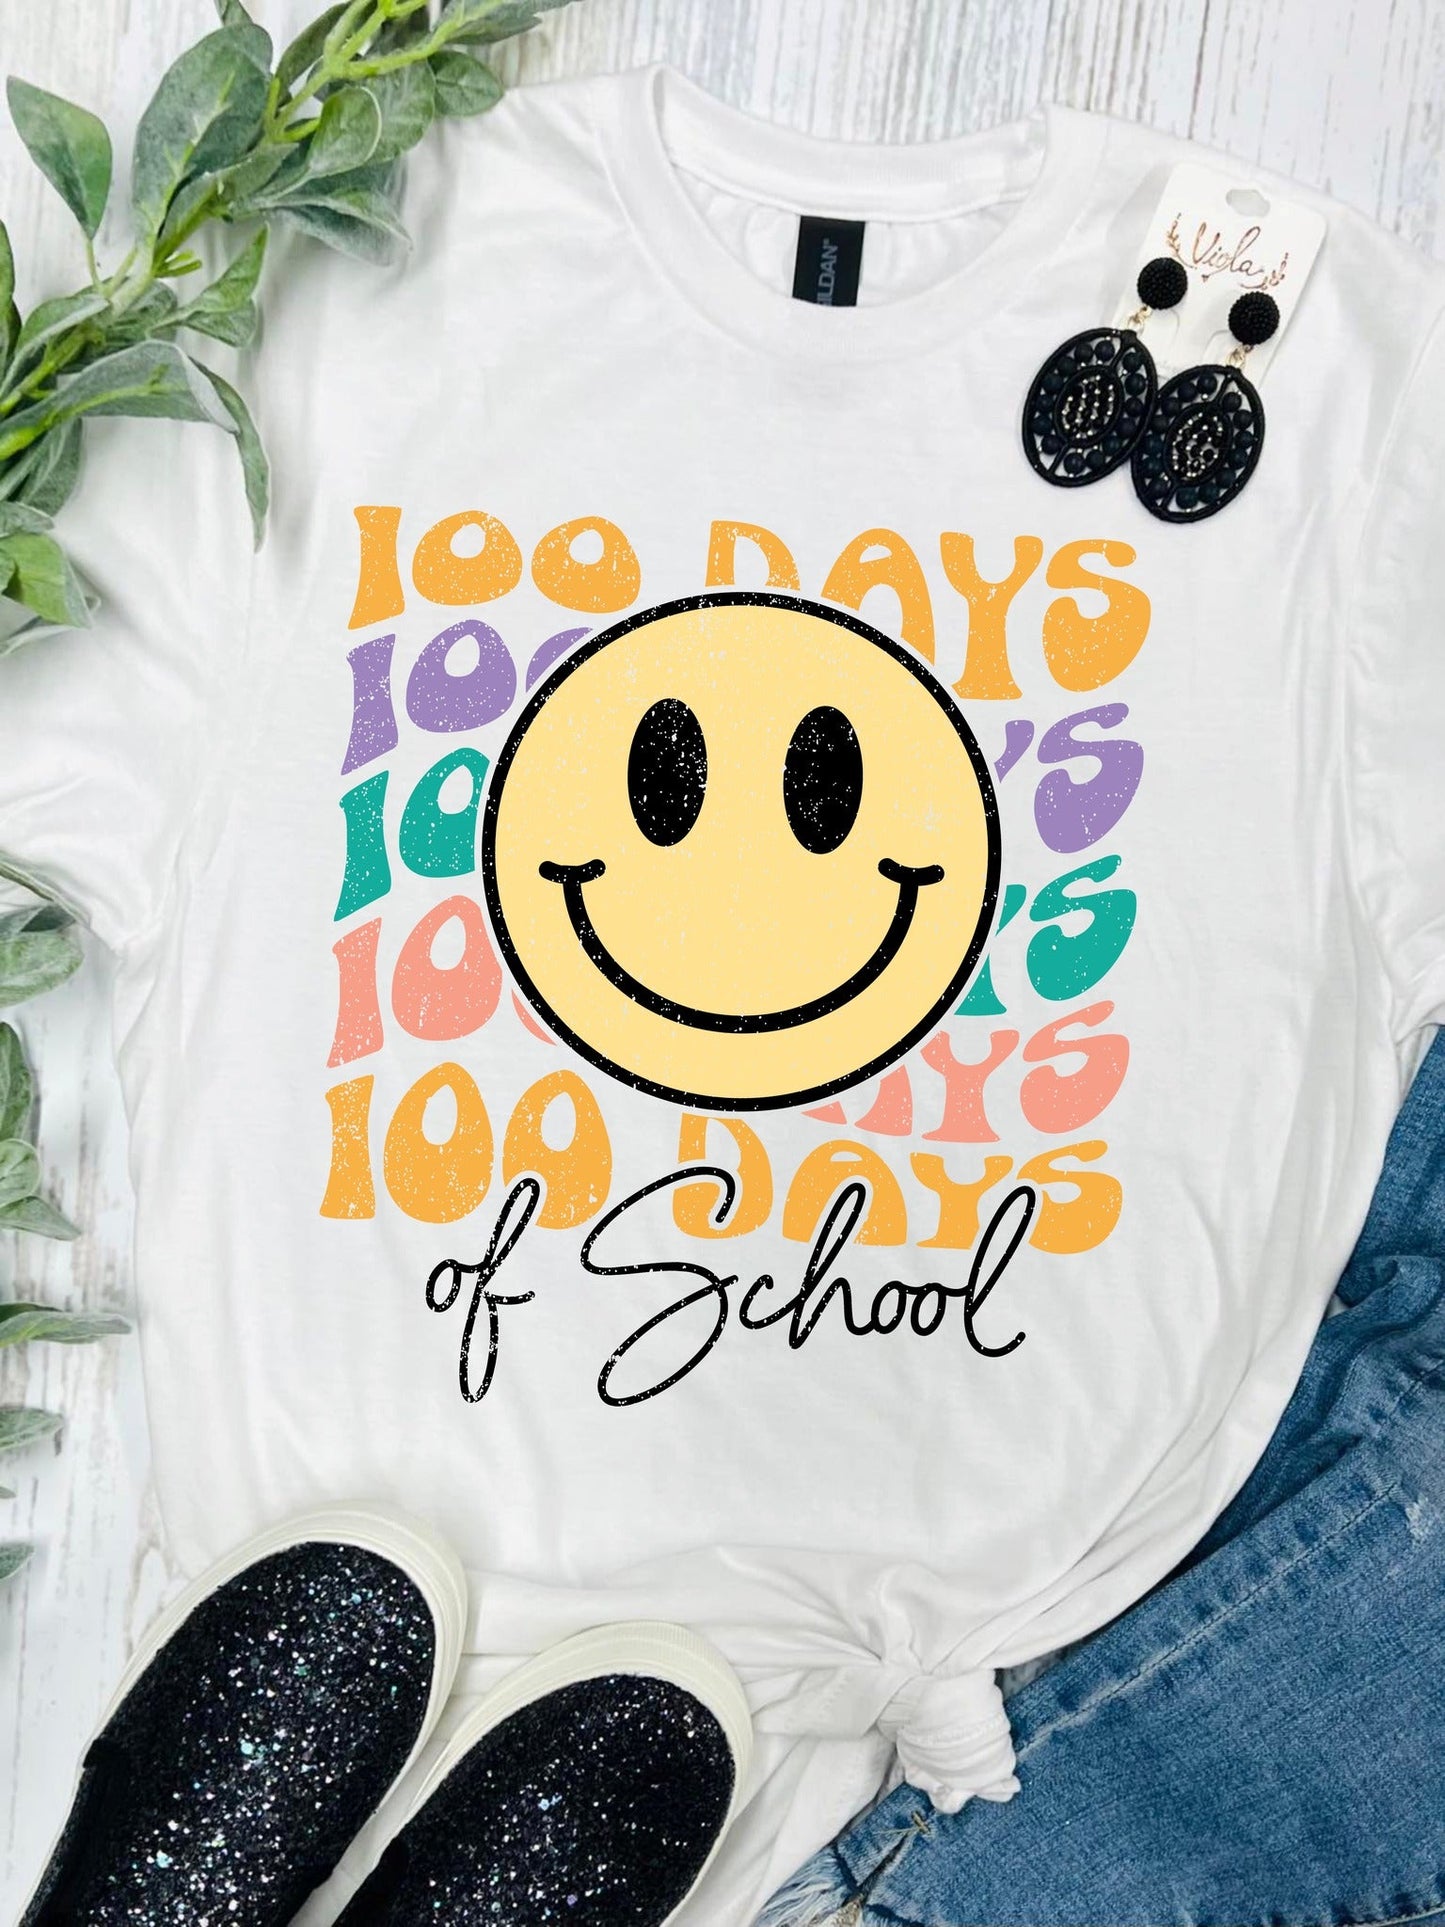 Smiley Face 100 Days Of School White Tee